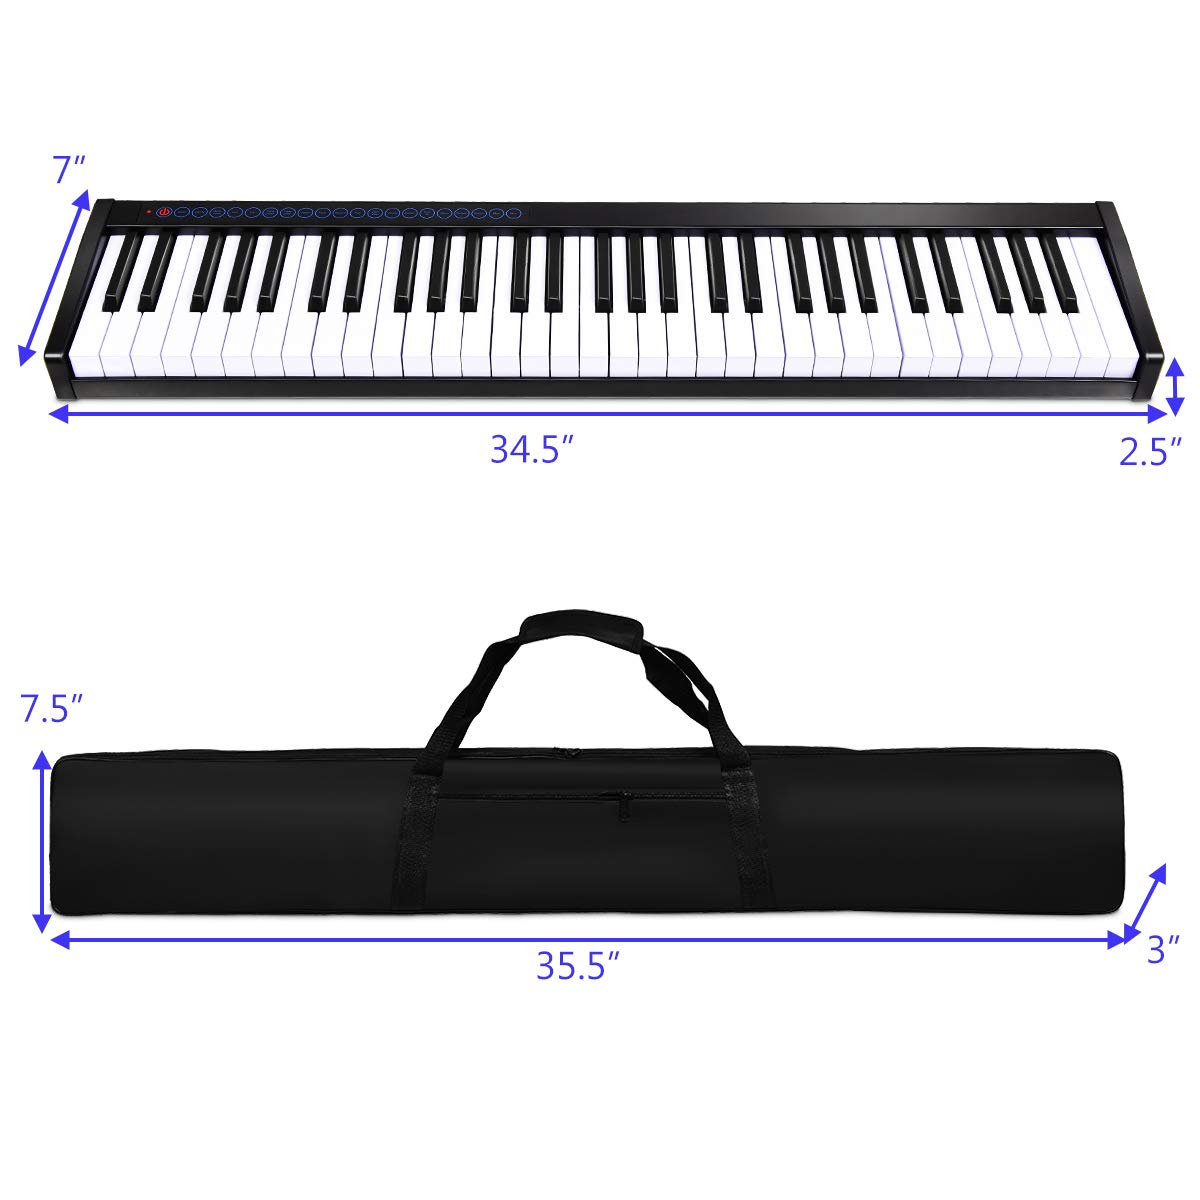  Roll-up Piano 61 keys,Electronic Hand Roll Portable Piano with  128 Unique Tones and Built-in Speaker, Upgraded Waterproof Silicone Fold  able Piano Keyboard for Beginners and Kids : Musical Instruments